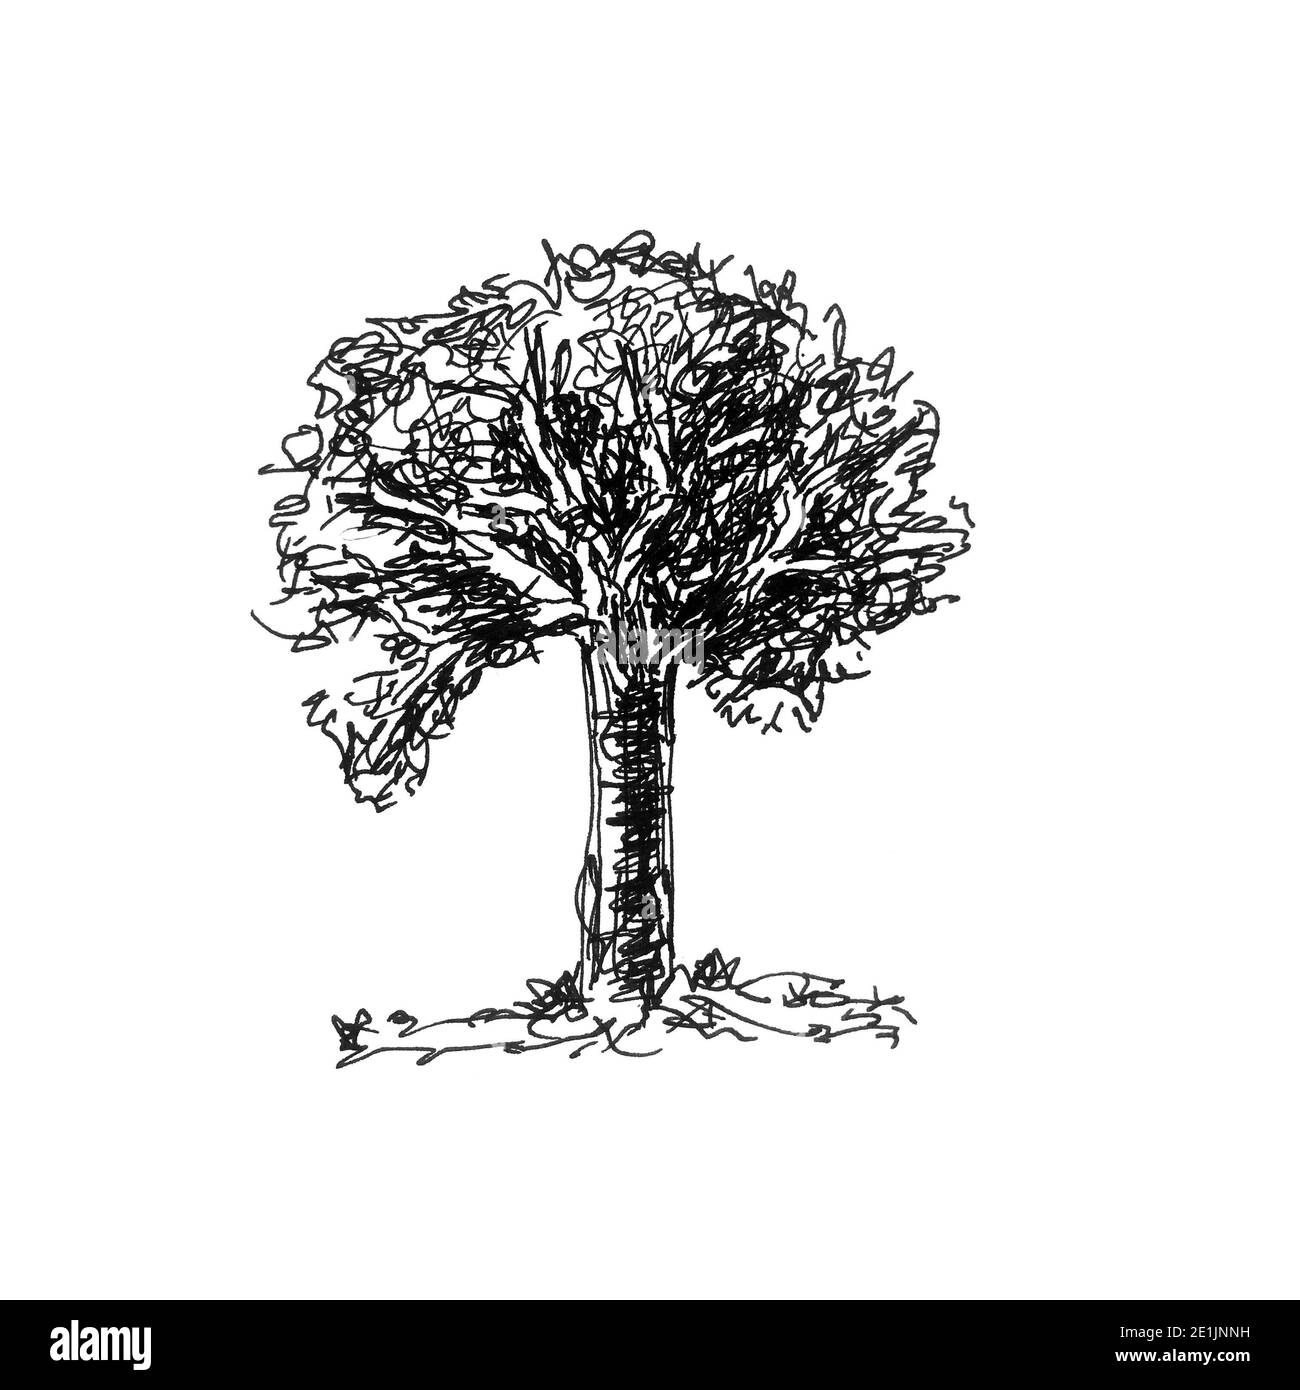 Hand drawn old tree isolated on white background.Sketch illustration. Stock Photo